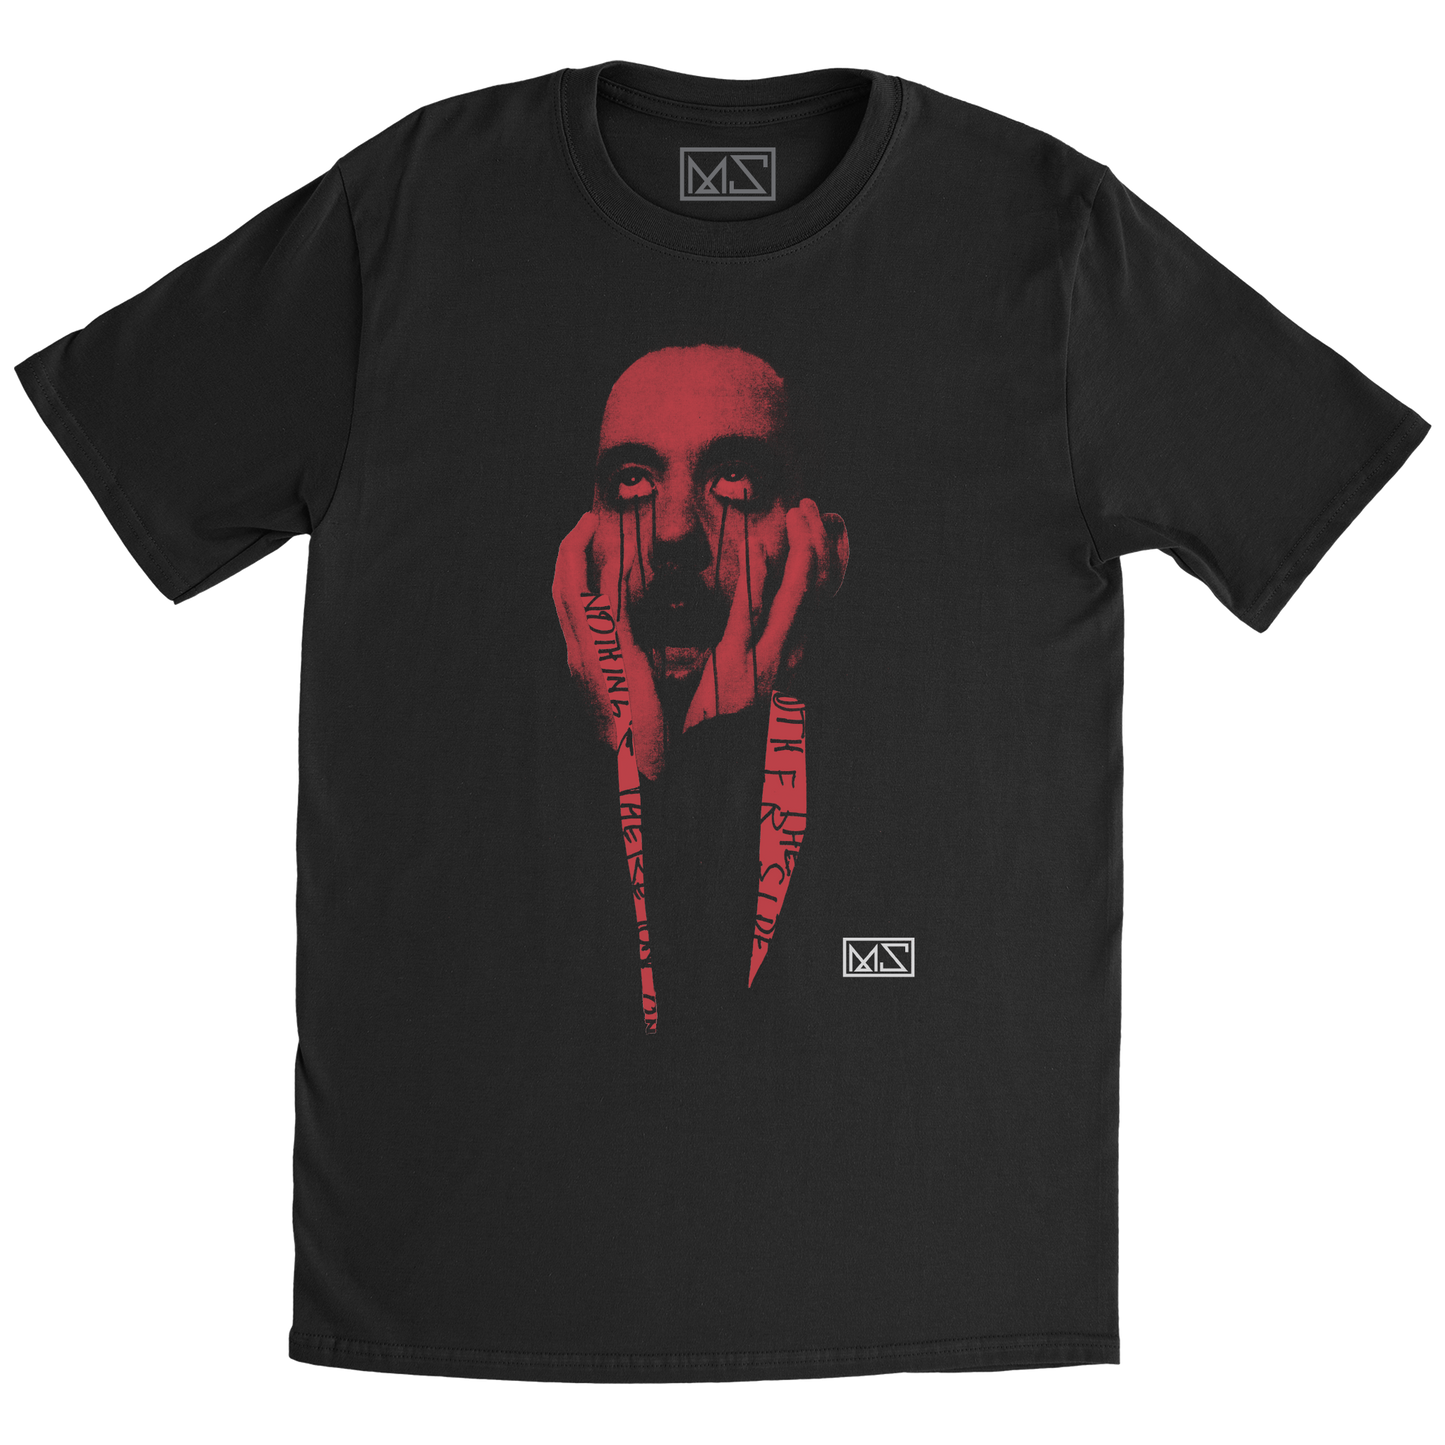 MS - The Other Side Black Tee